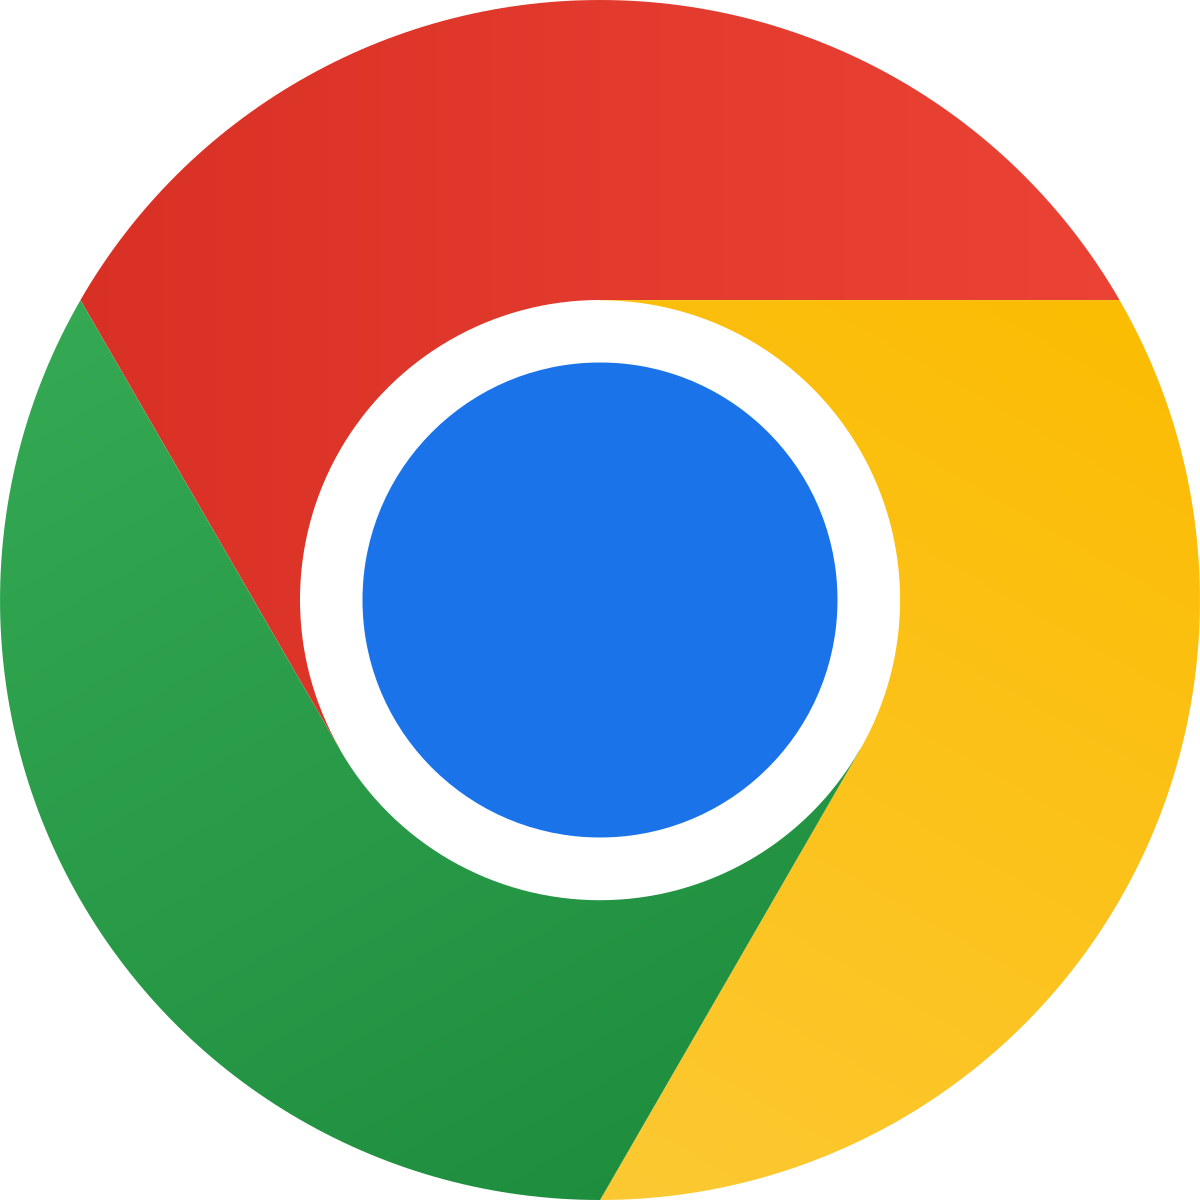 A computer screen displaying the Google Chrome logo with a progress bar indicating an update or installation process.